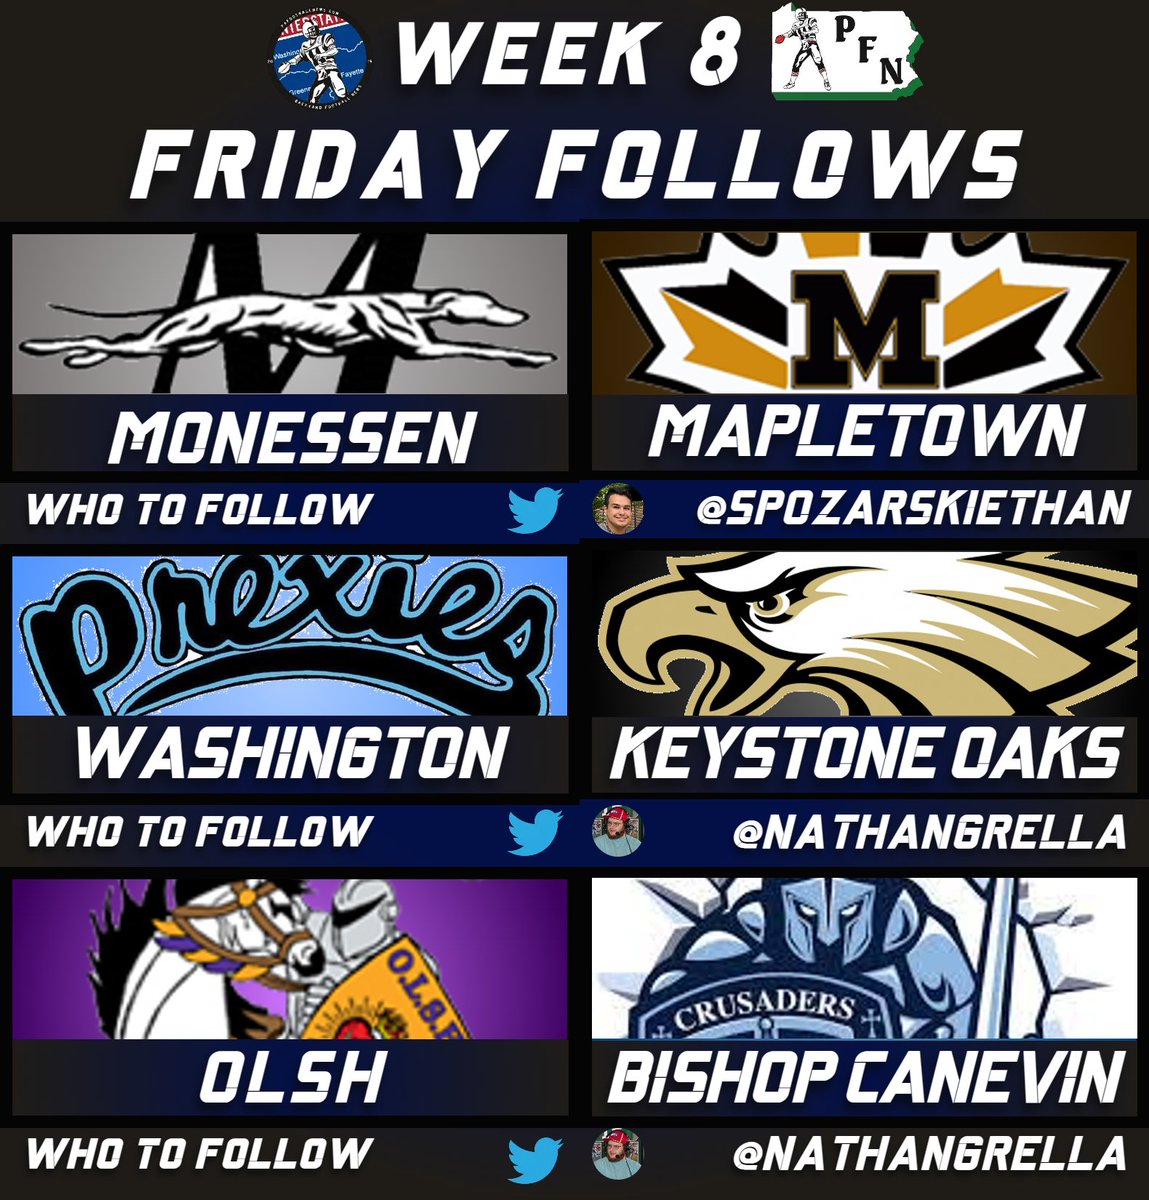 FRIDAY FOLLOWS FOR TODAY AND TOMORROW! @Hounds_Football @ @MapletownSports | @SpozarskiEthan @WashHighFB @ @ko_goldeneagles | @NathanGrella @OLSHFOOTBALLHS @ @CrusadersFball | @NathanGrella Follow for Updates! Go Check Out Instagram for Picture Updates! @PaFootballNews